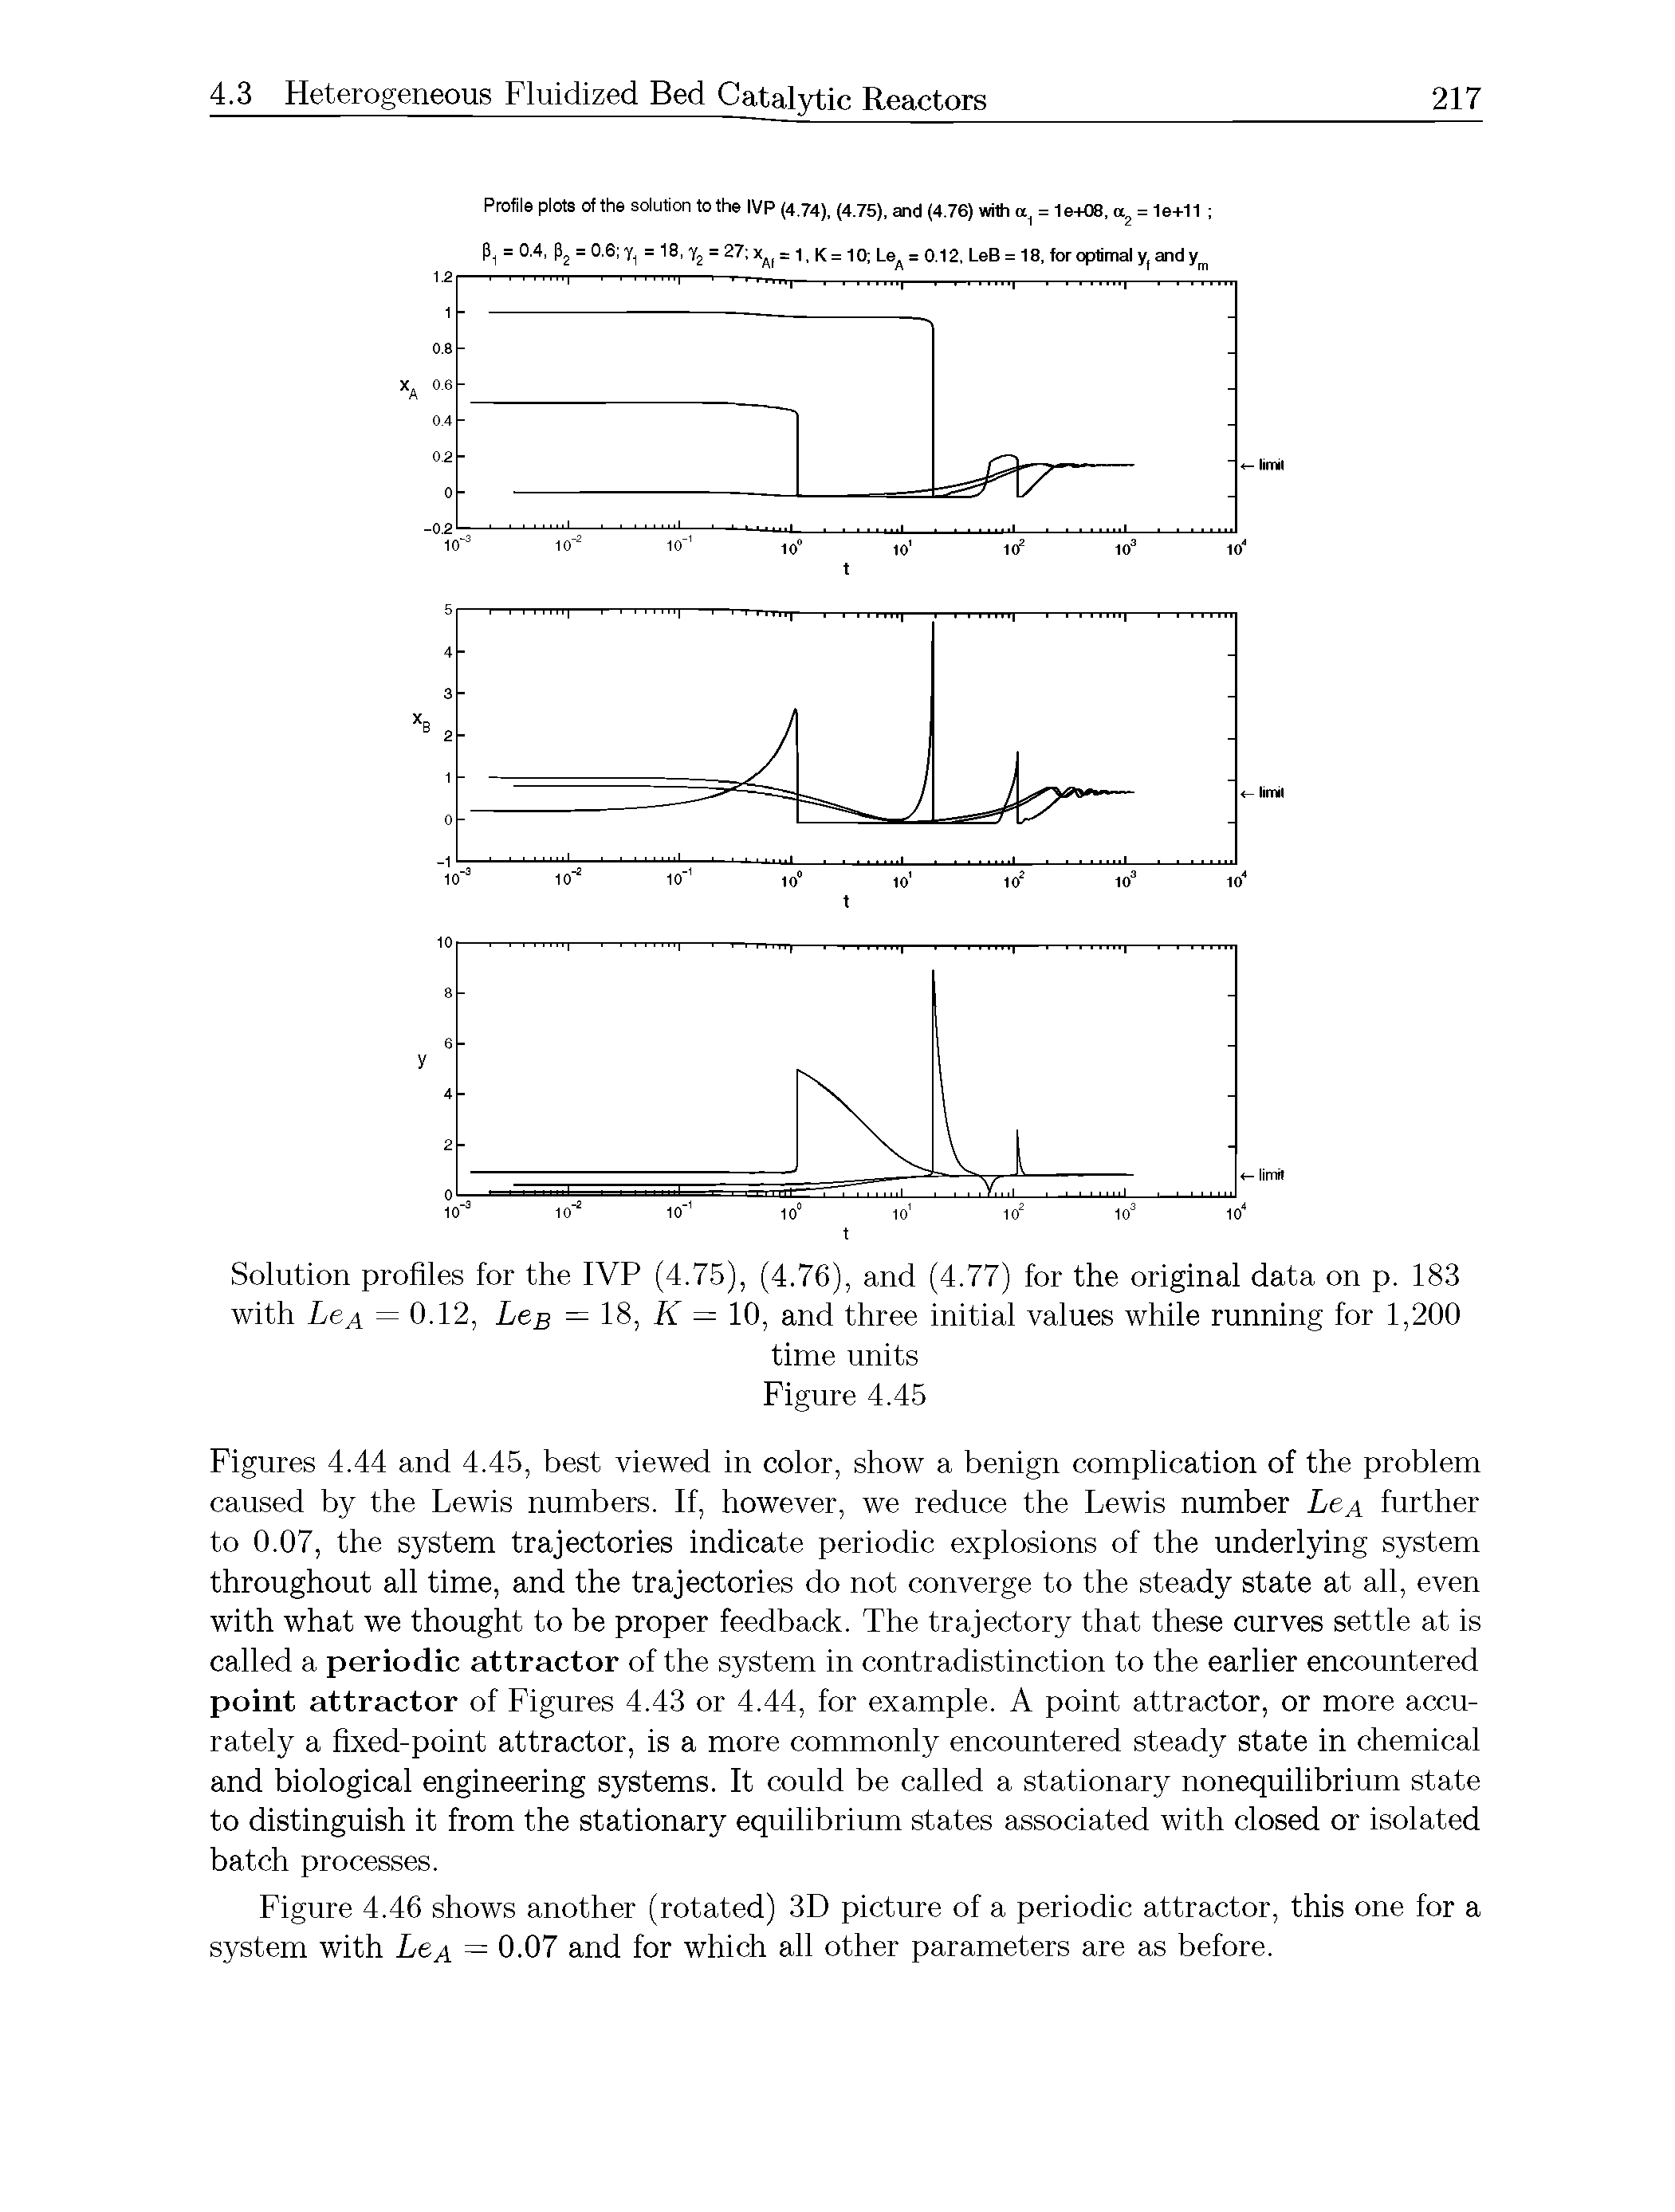 Figures 4.44 and 4.45, best viewed in color, show a benign complication of the problem caused by the Lewis numbers. If, however, we reduce the Lewis number LeA further to 0.07, the system trajectories indicate periodic explosions of the underlying system throughout all time, and the trajectories do not converge to the steady state at all, even with what we thought to be proper feedback. The trajectory that these curves settle at is called a periodic attractor of the system in contradistinction to the earlier encountered point attractor of Figures 4.43 or 4.44, for example. A point attractor, or more accurately a fixed-point attractor, is a more commonly encountered steady state in chemical and biological engineering systems. It could be called a stationary nonequilibrium state to distinguish it from the stationary equilibrium states associated with closed or isolated batch processes.